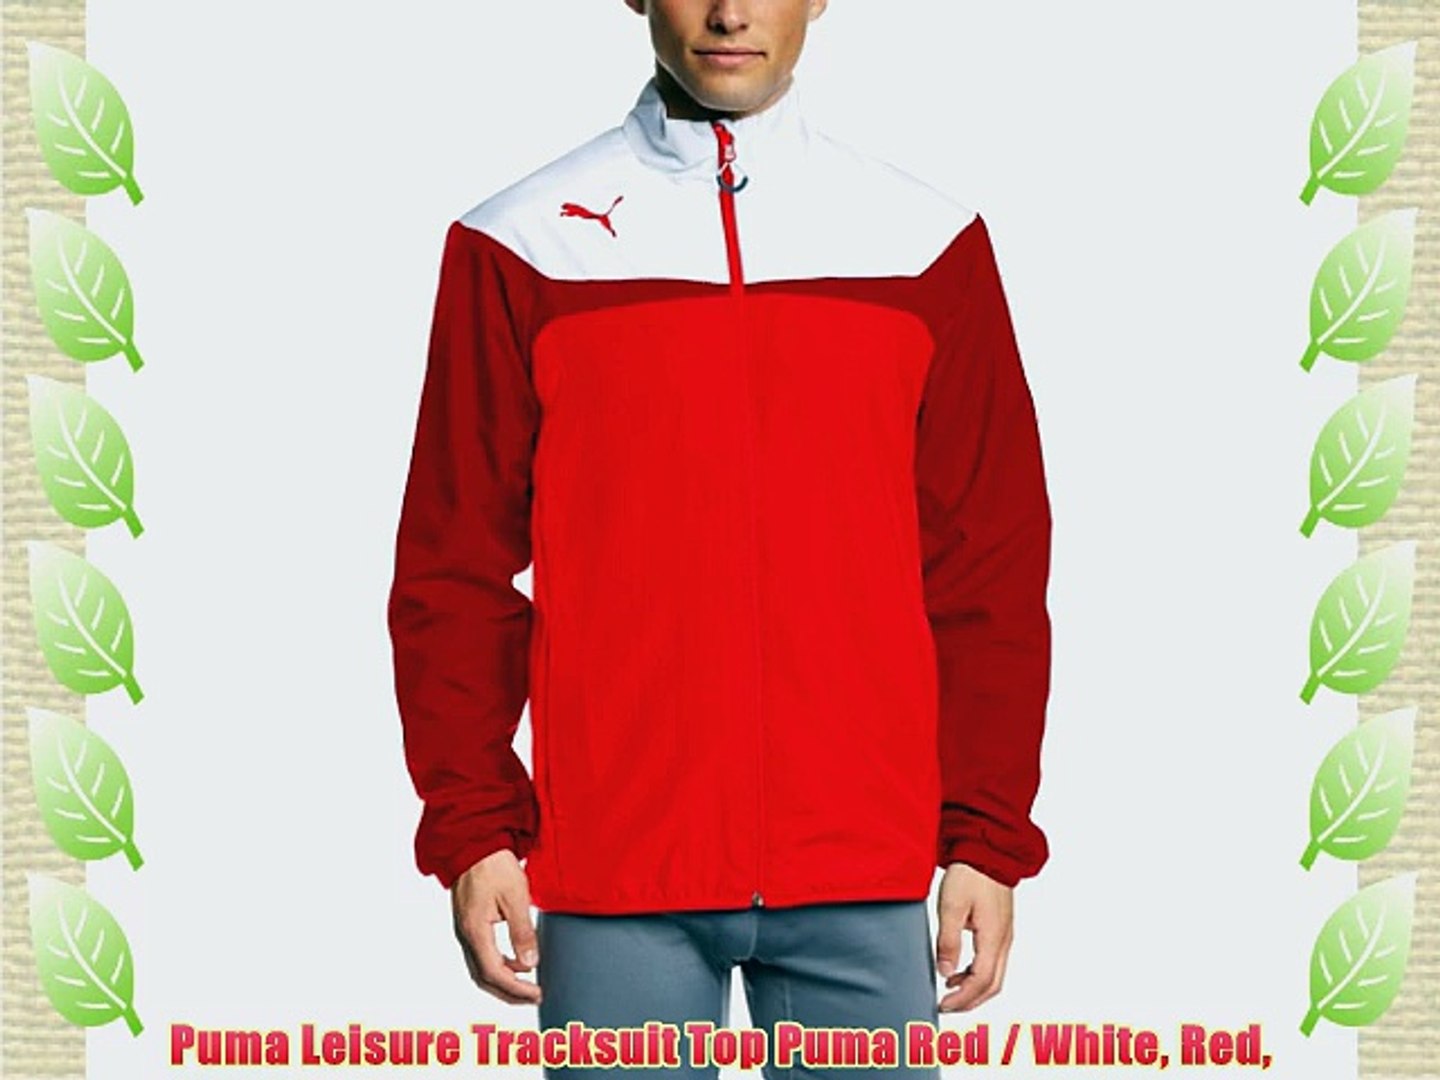 Tracksuit Top Puma Red / White Red 